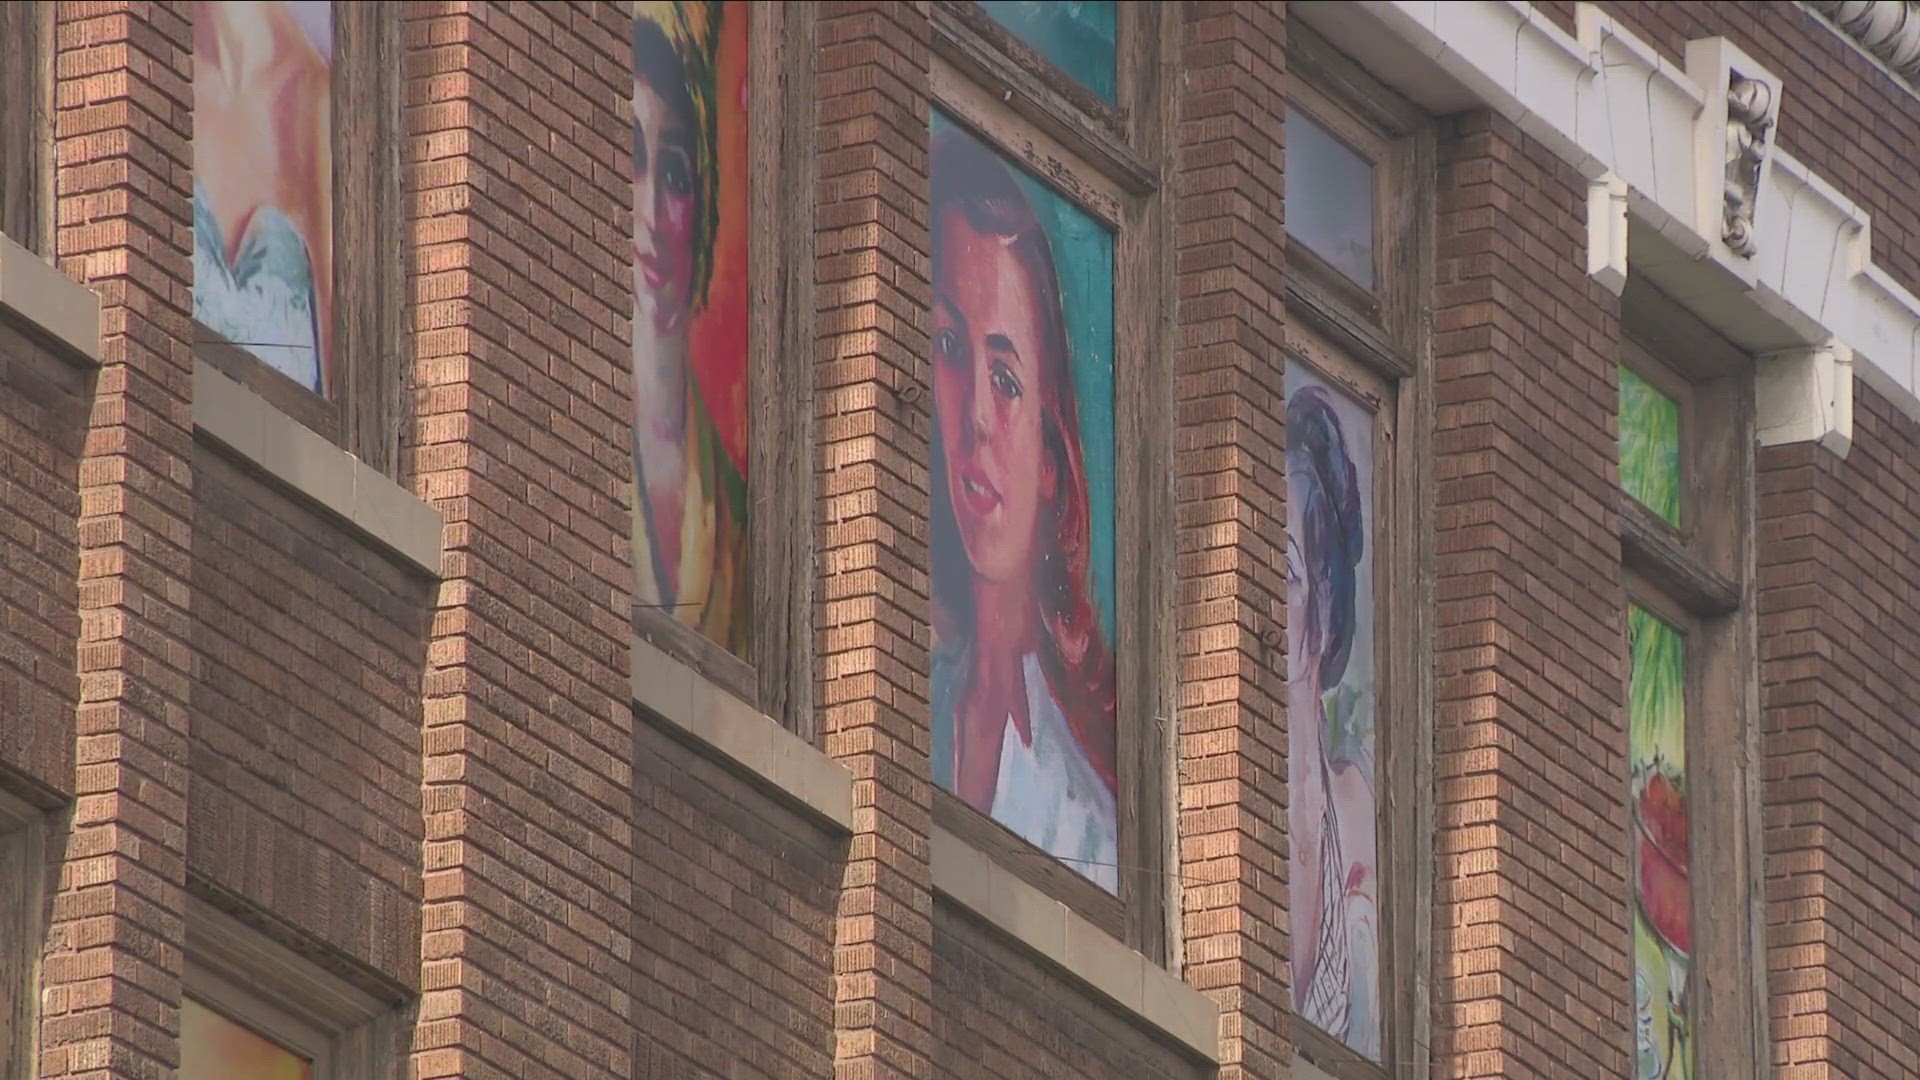 184 portraits painted on Jenss Department Store on Main Street